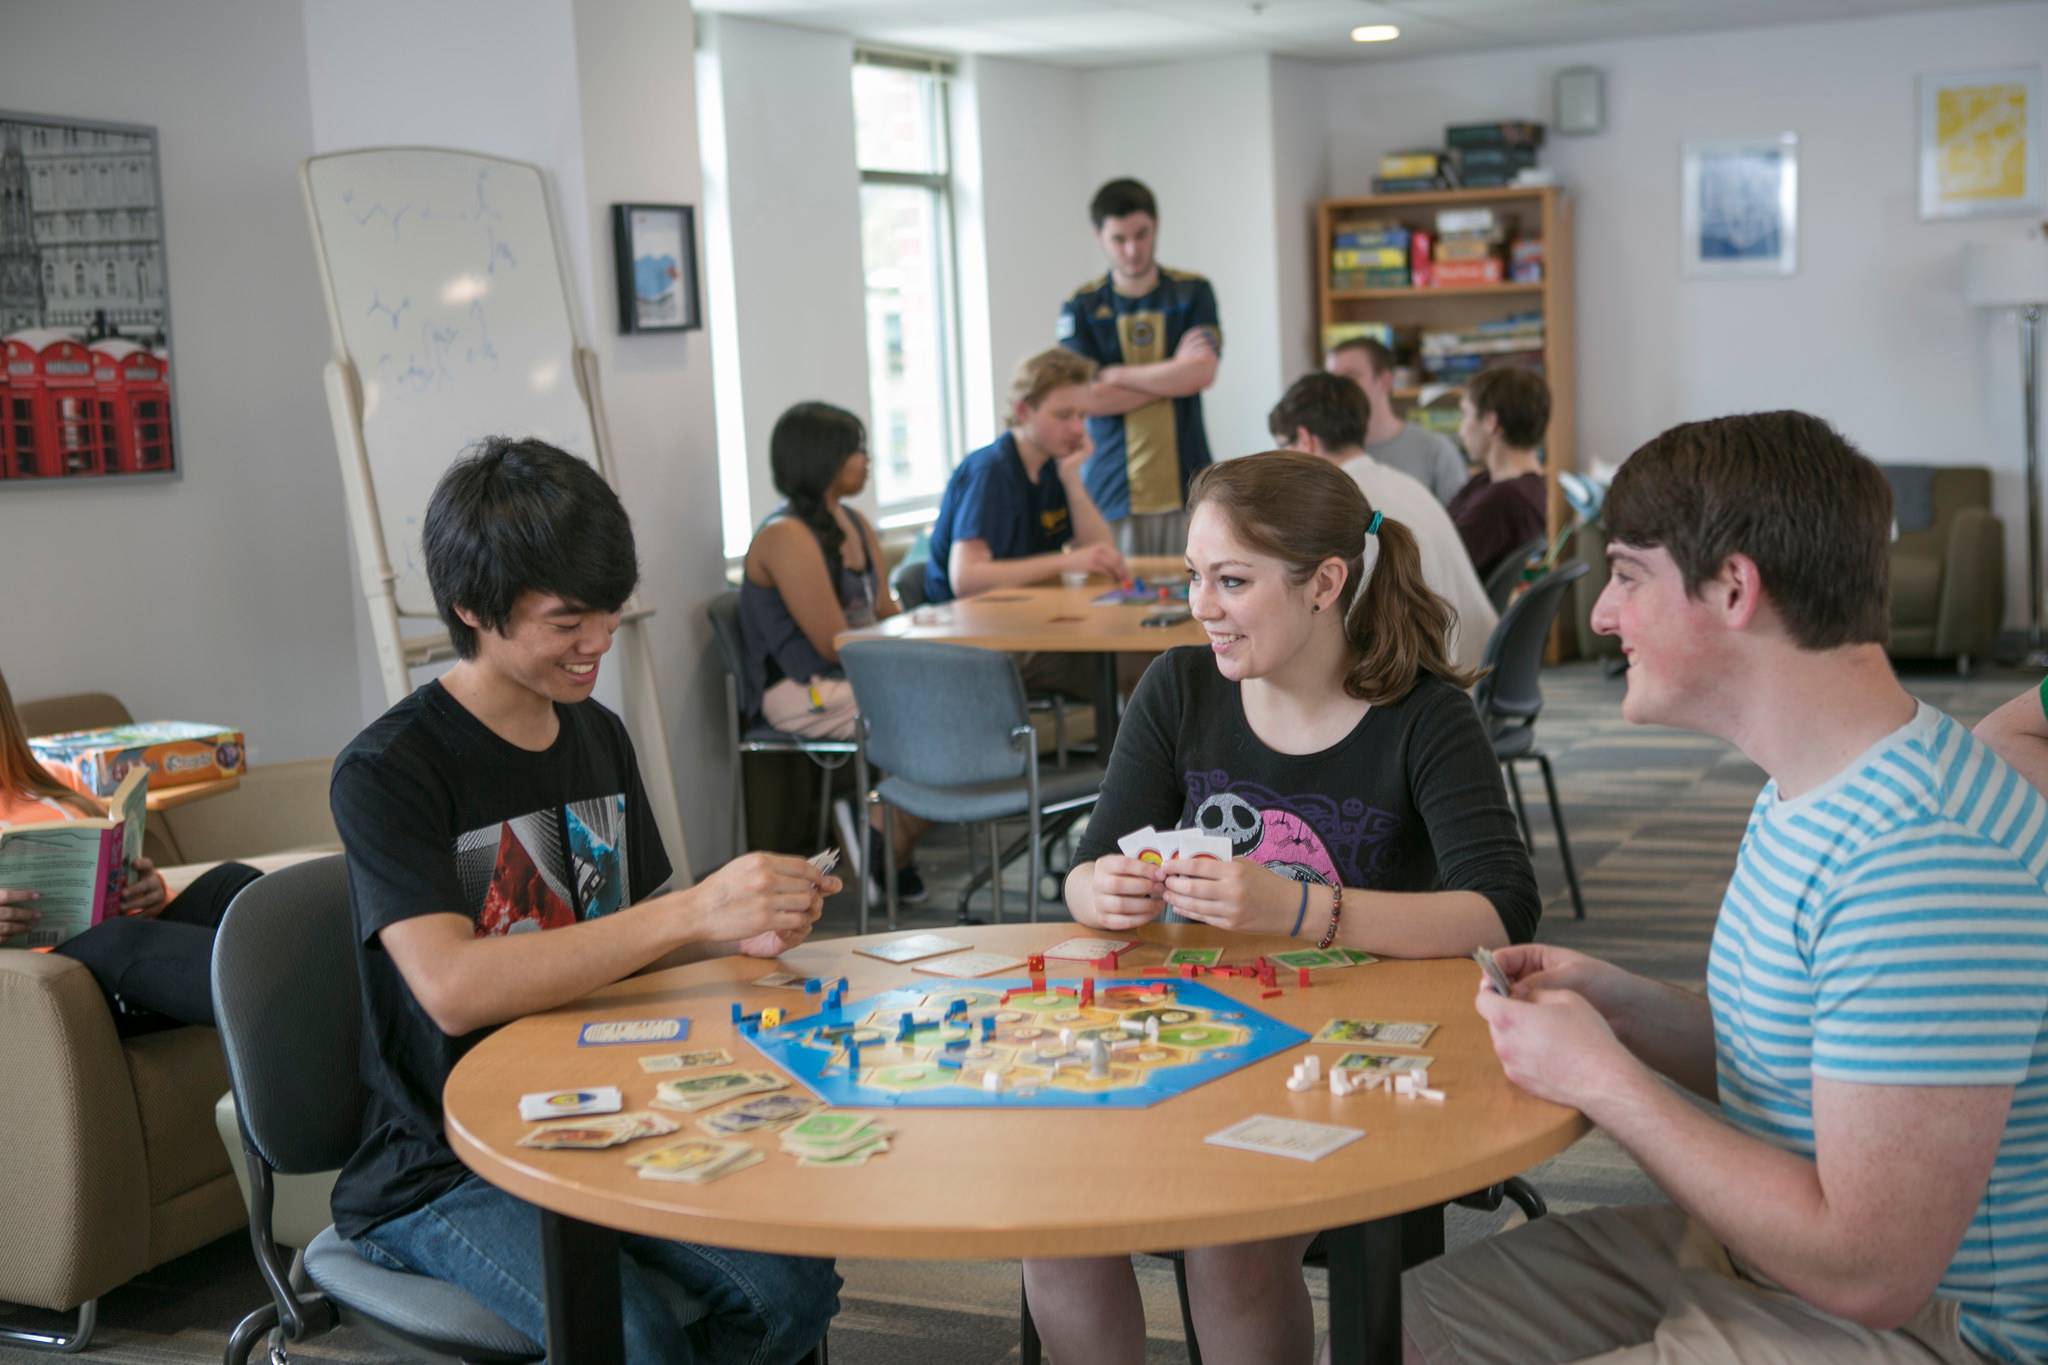 Americans are loving board games